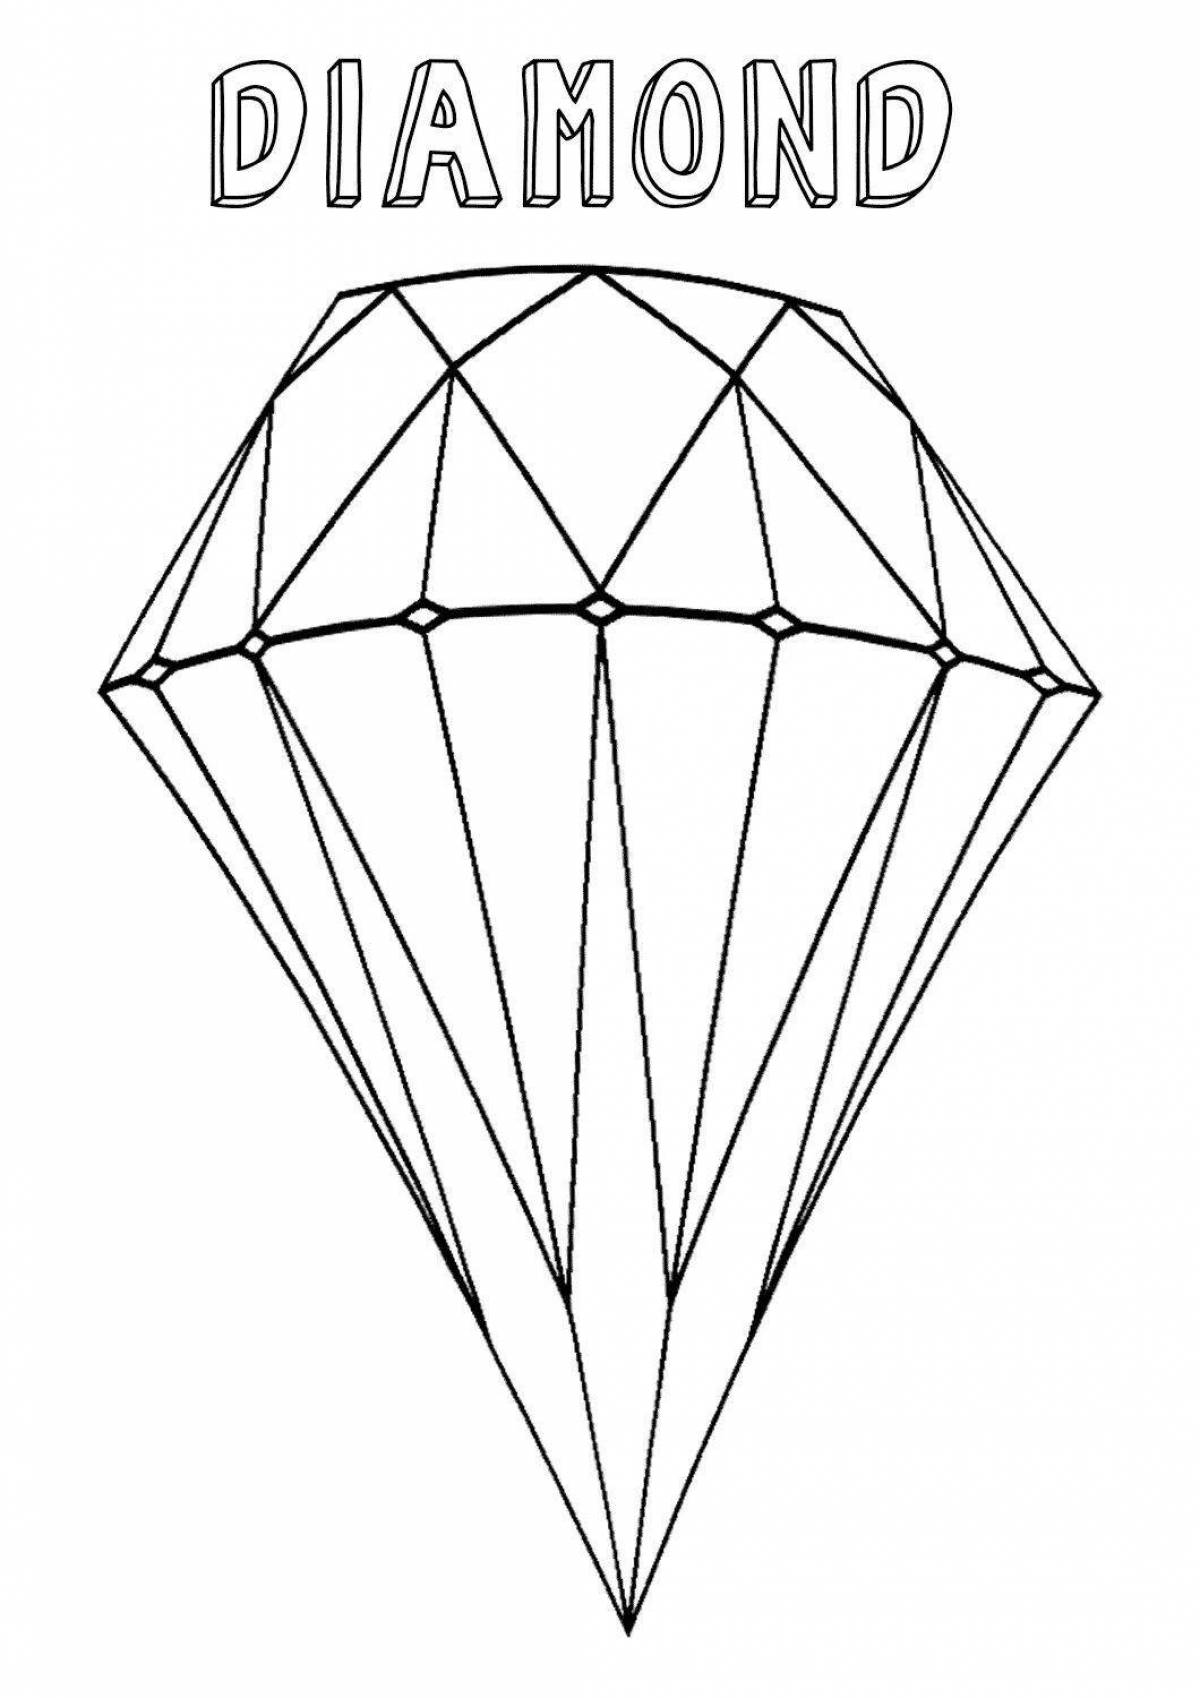 Great diamond coloring book for kids